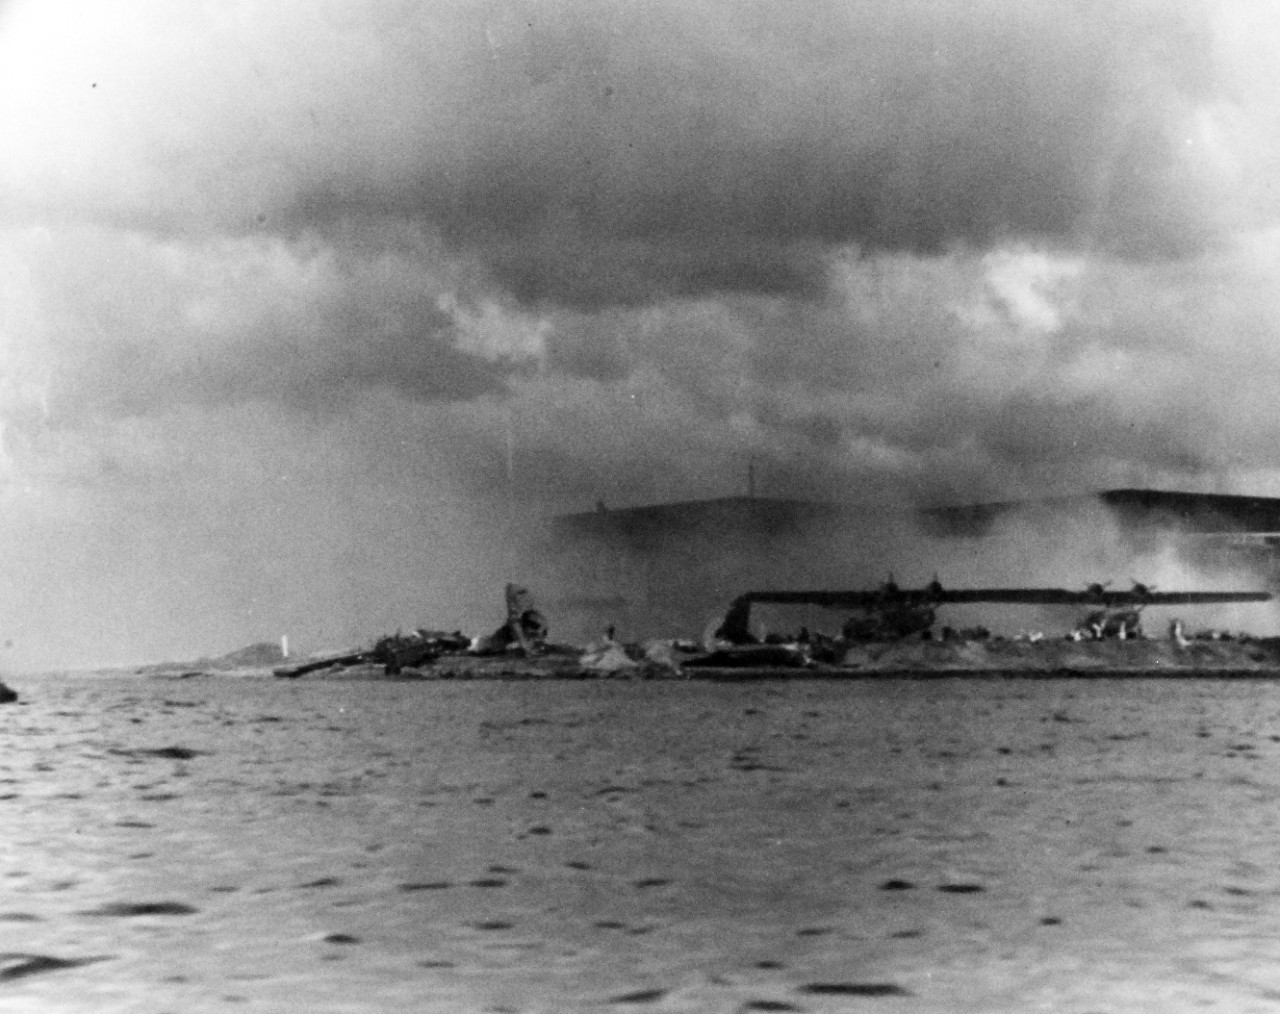 80-G-32759:   Japanese Attack on Pearl Harbor, December 7, 1941.  U.S. aircraft destroyed as a result of the Japanese bombing.  Official U.S. Navy photograph, now in the collections of the National Archives. (9/9/2015).